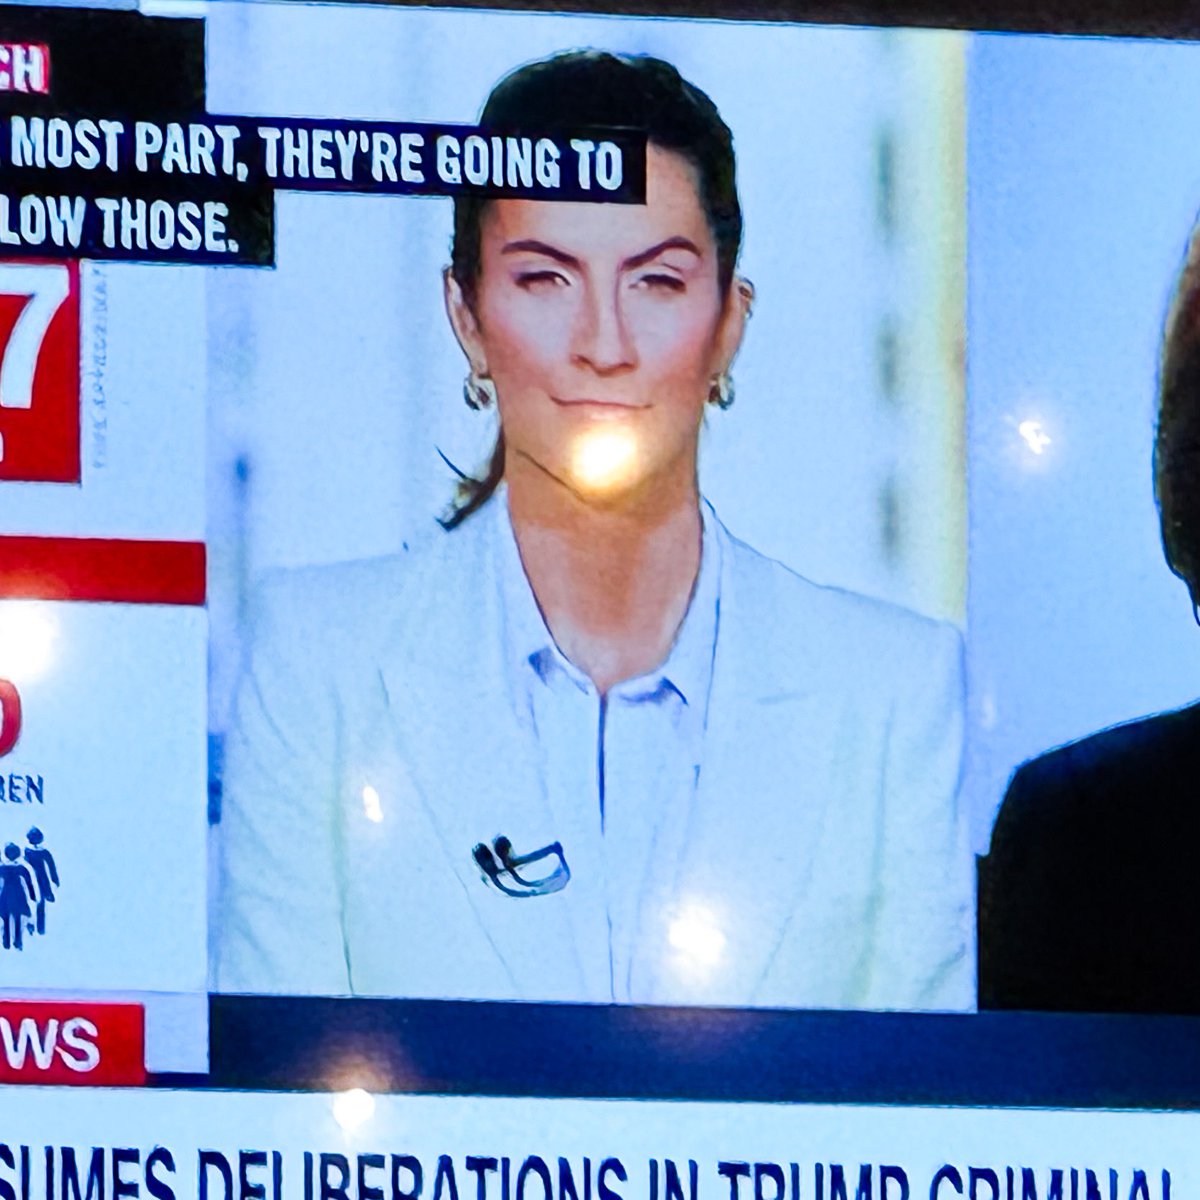 I actually didn’t think it possible that Kaitlin Collins could look more like a mirthless shrew with a giant stick up her ass… then she pulled her hair into a ponytail.